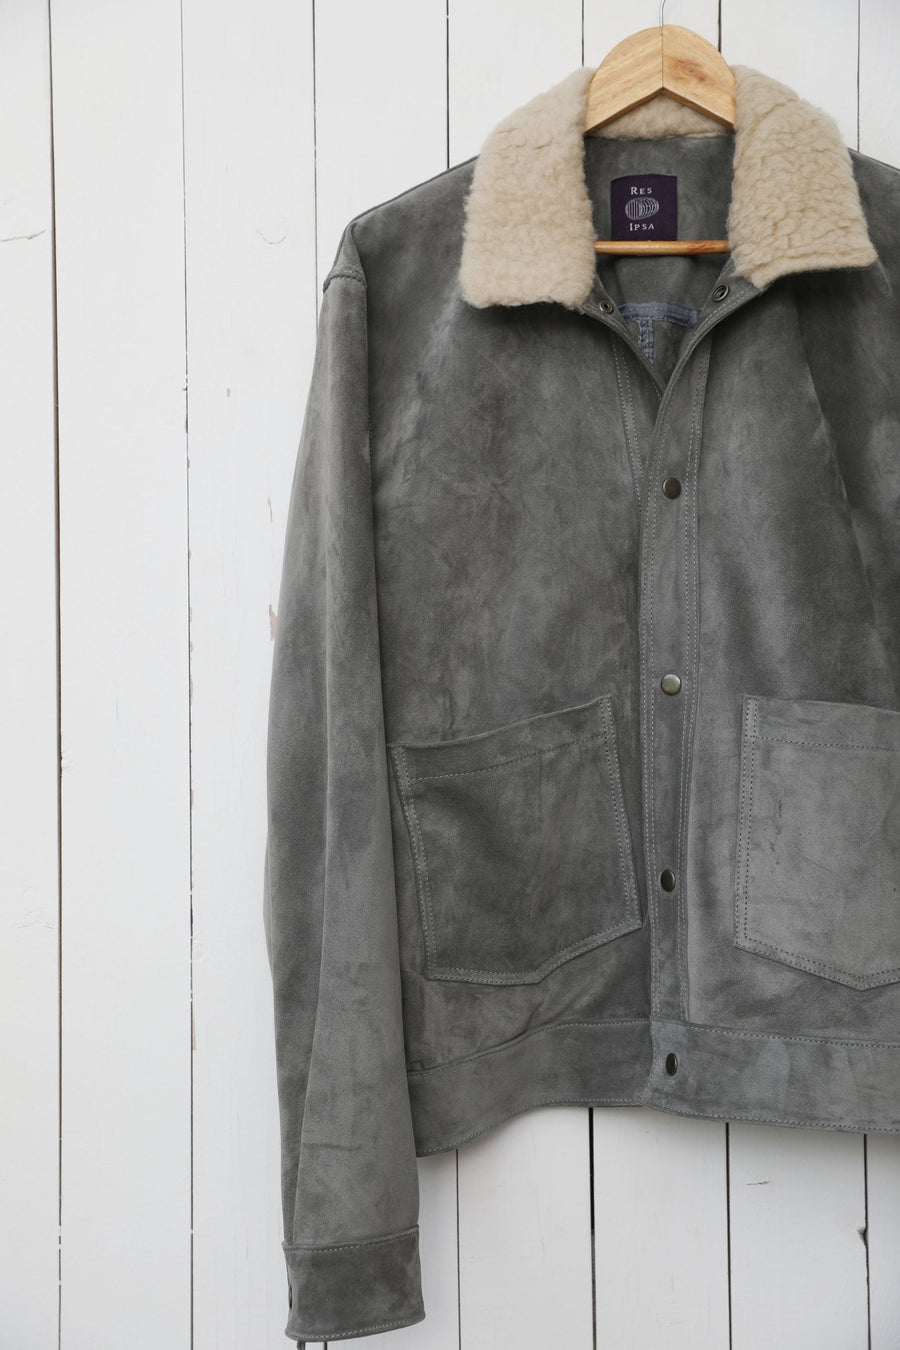 Suede Jacket With Shearling Collar #2 - RES IPSA